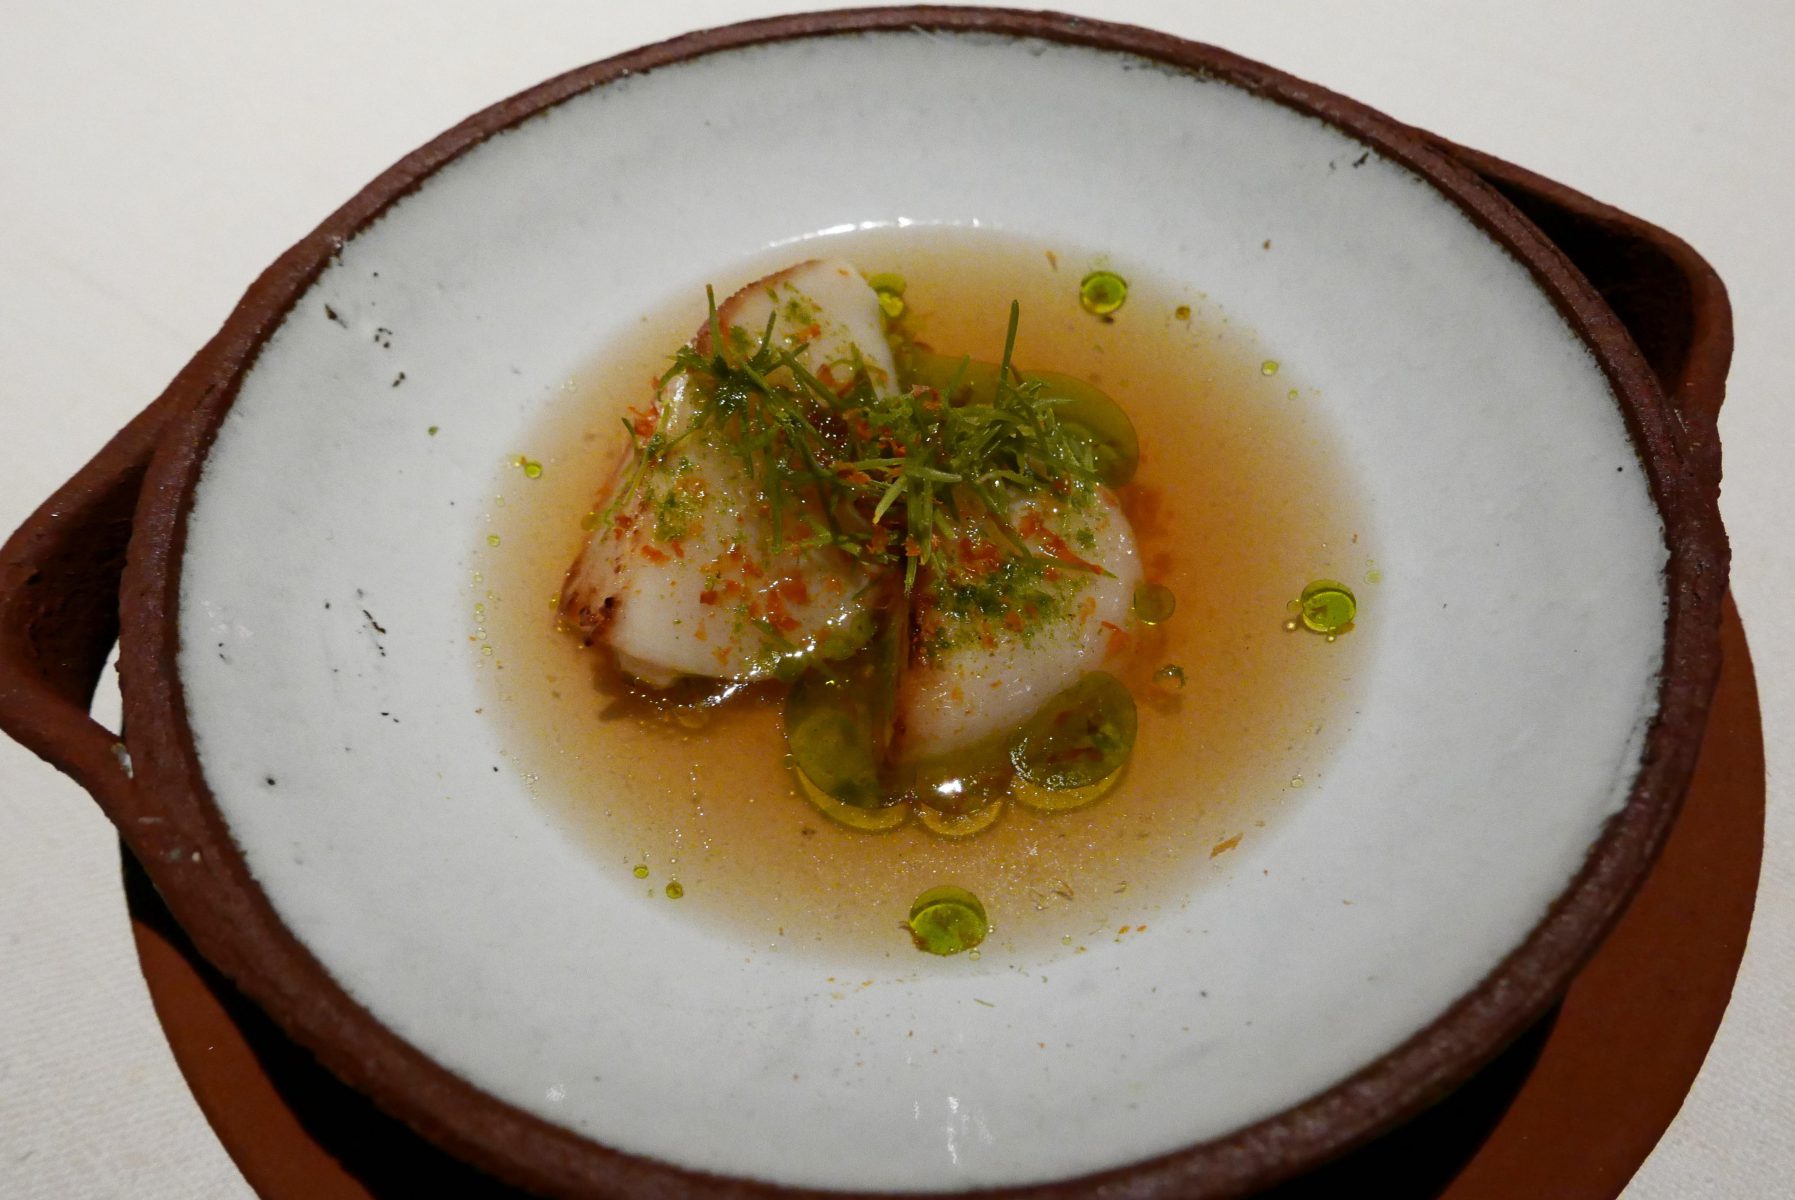 Seared live scallop in "dashi" with finger lime and spruce tips